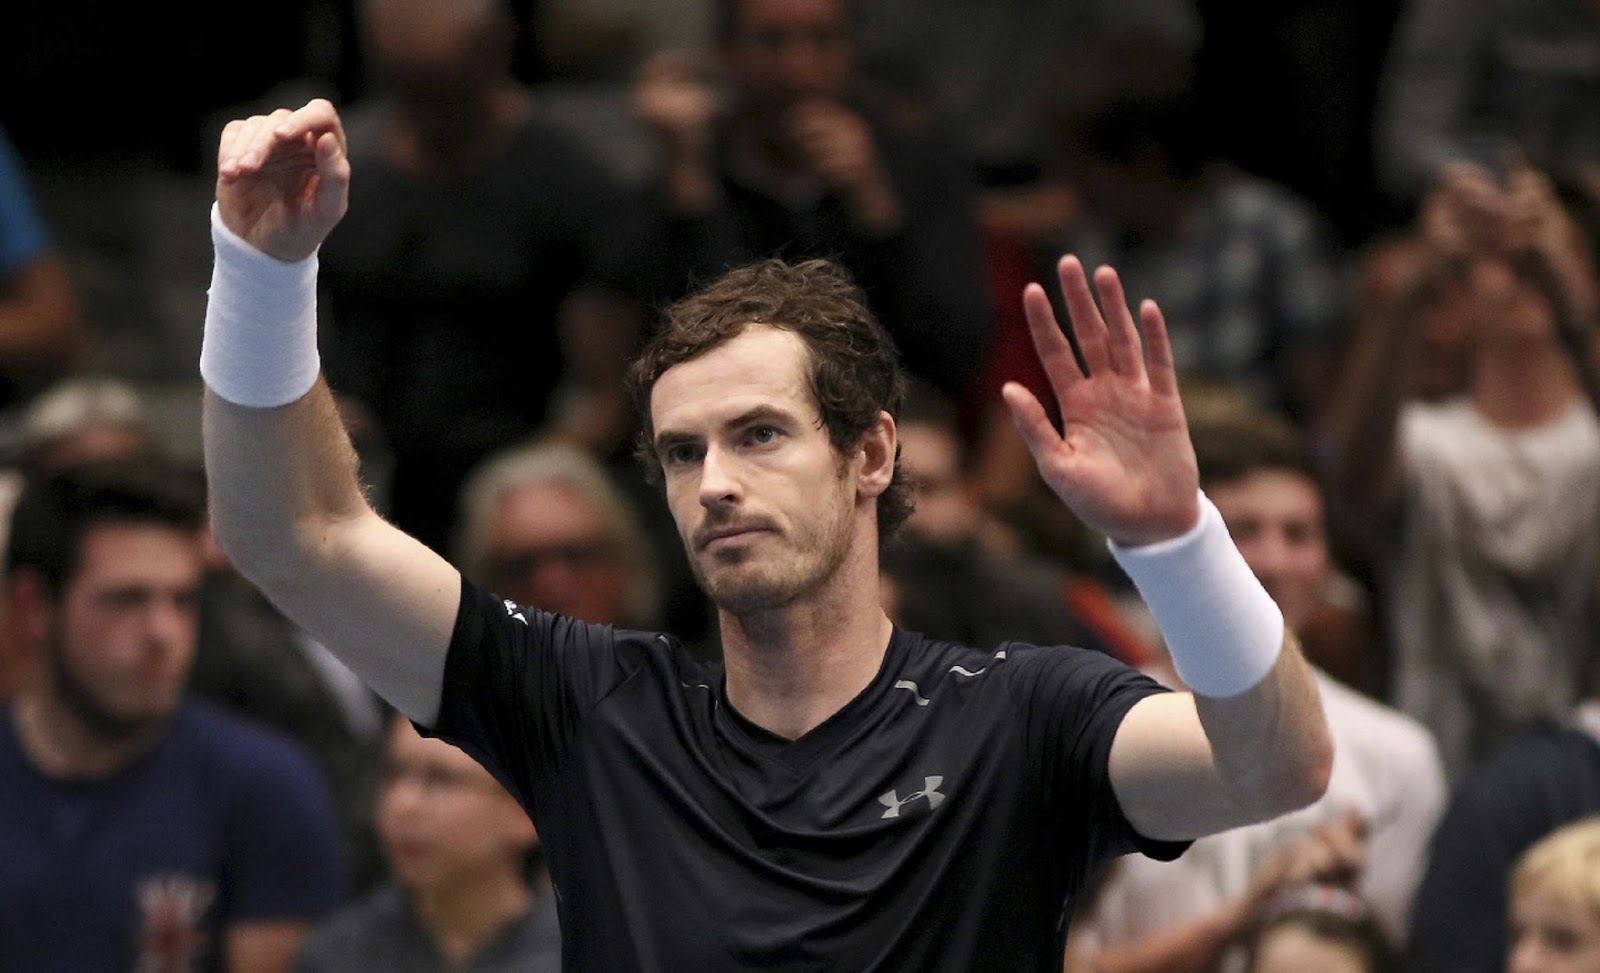 ANDY MURRAY 6